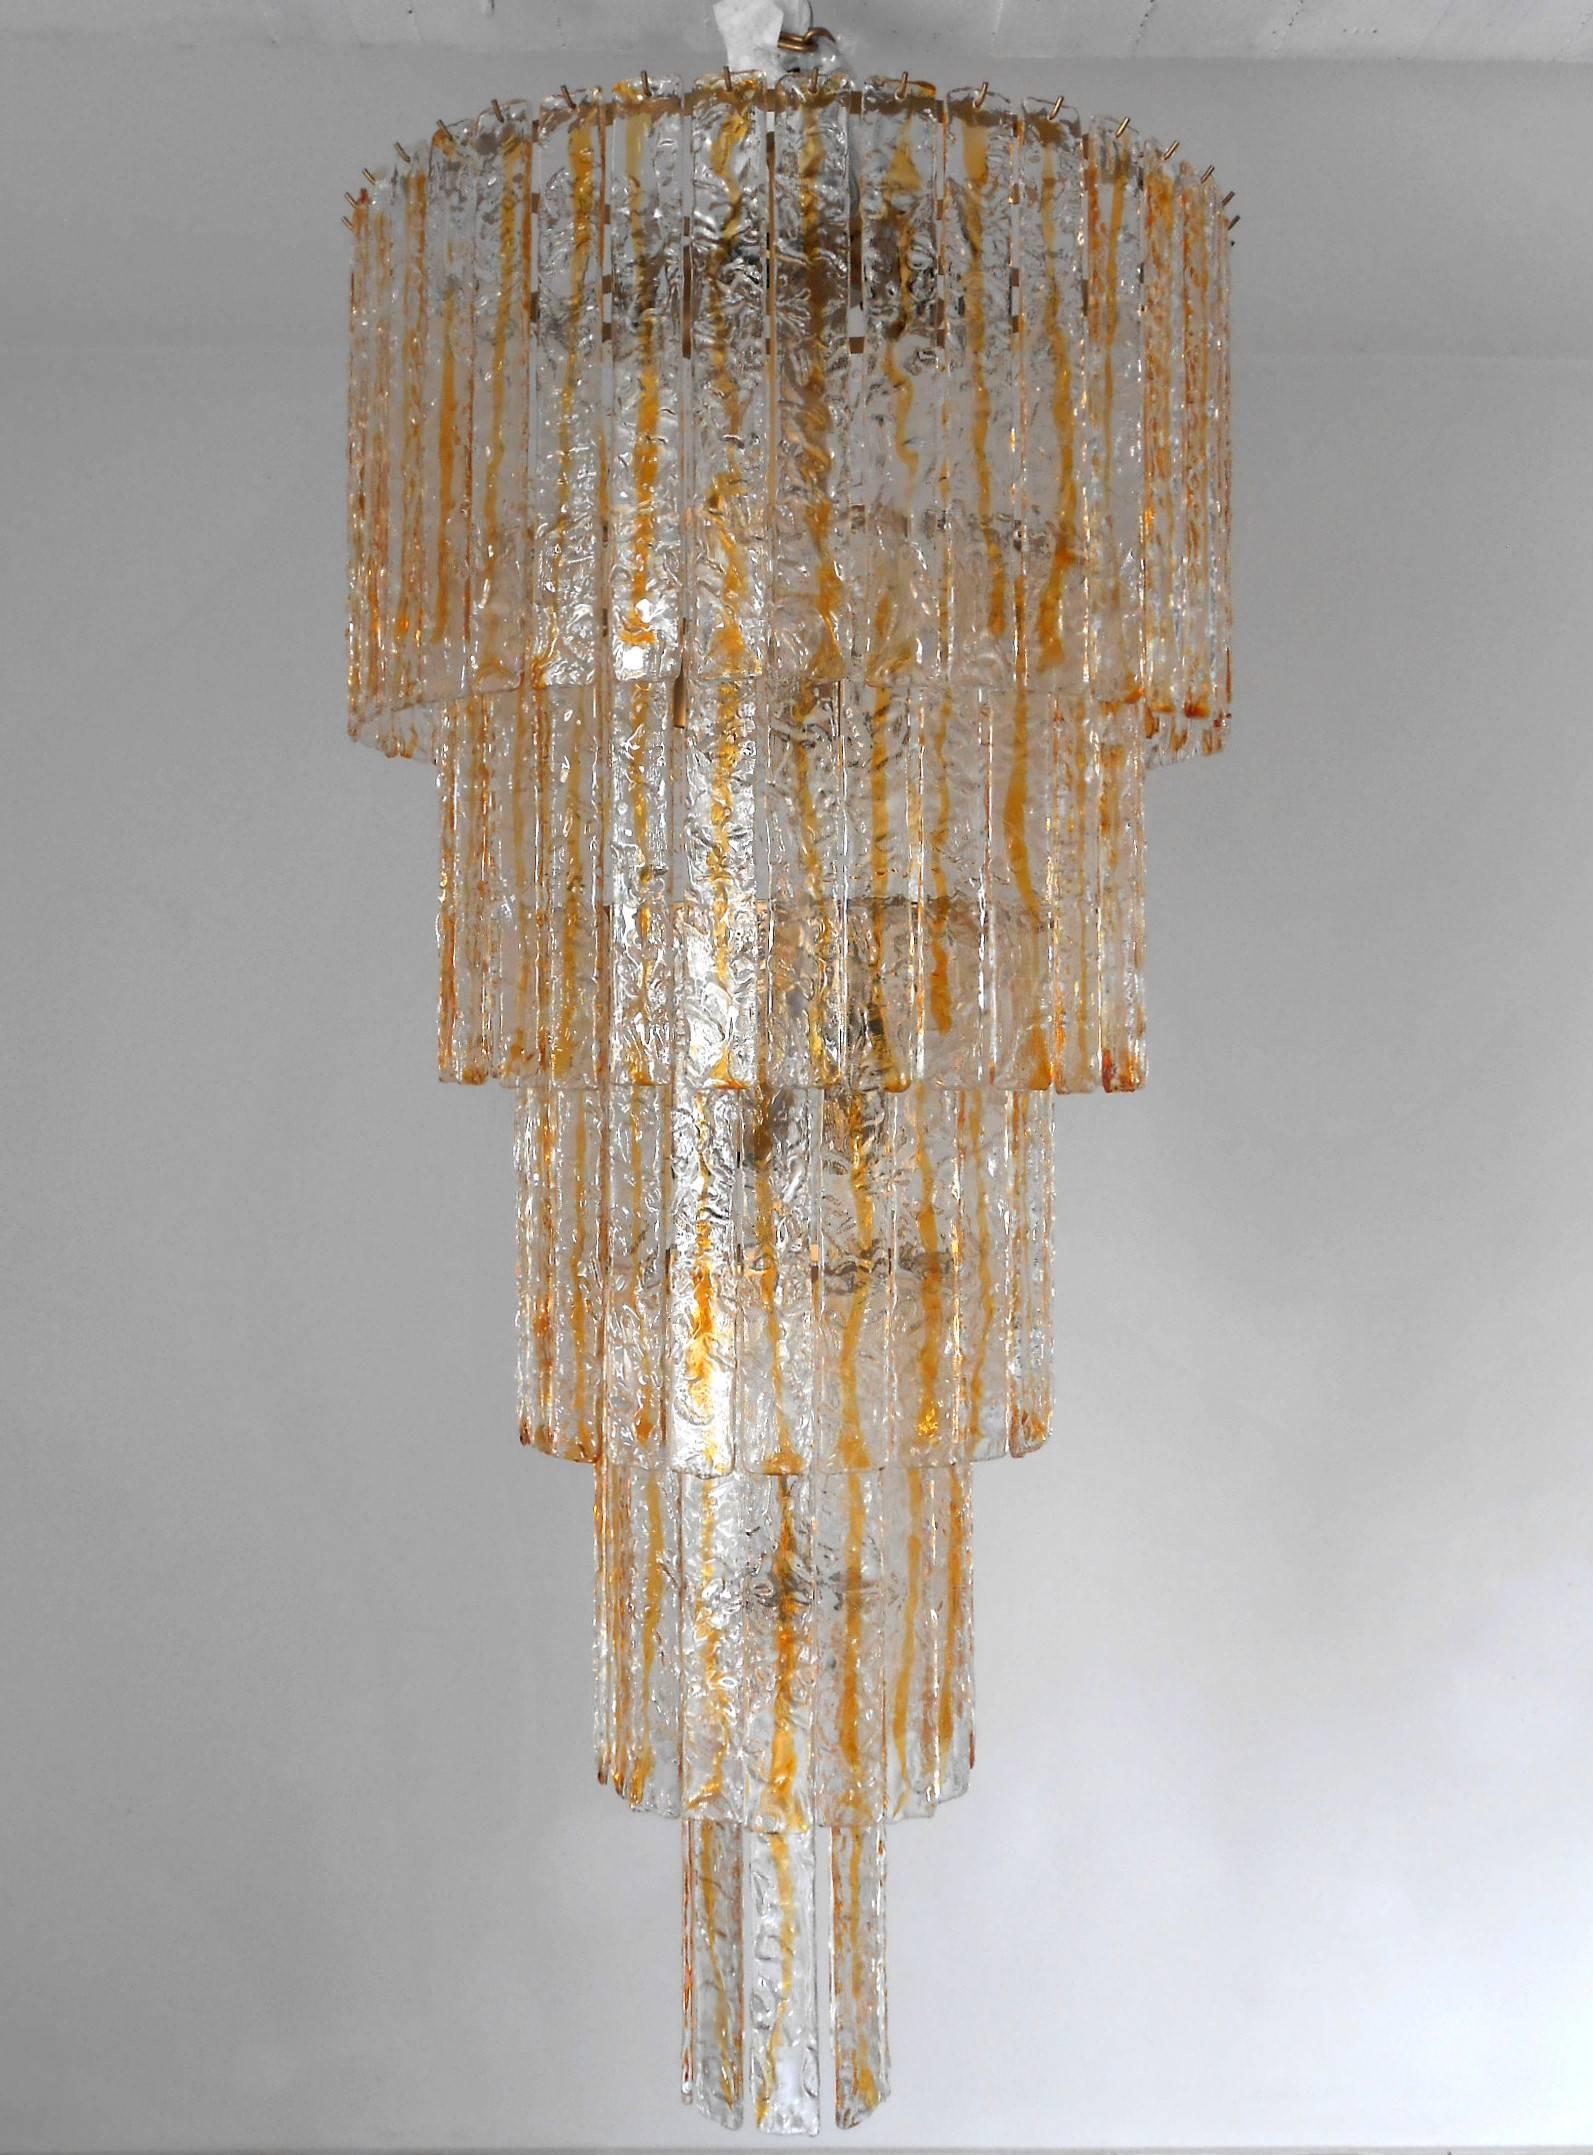 Vintage Italian chandelier with clear and amber Murano textured glass planks, mounted on brass frame / Designed by Mazzega circa 1960’s / Made in Italy 
16 lights / E26 or E27 type / max 60W each
Diameter: 28 inches / Height: 60 inches plus chain